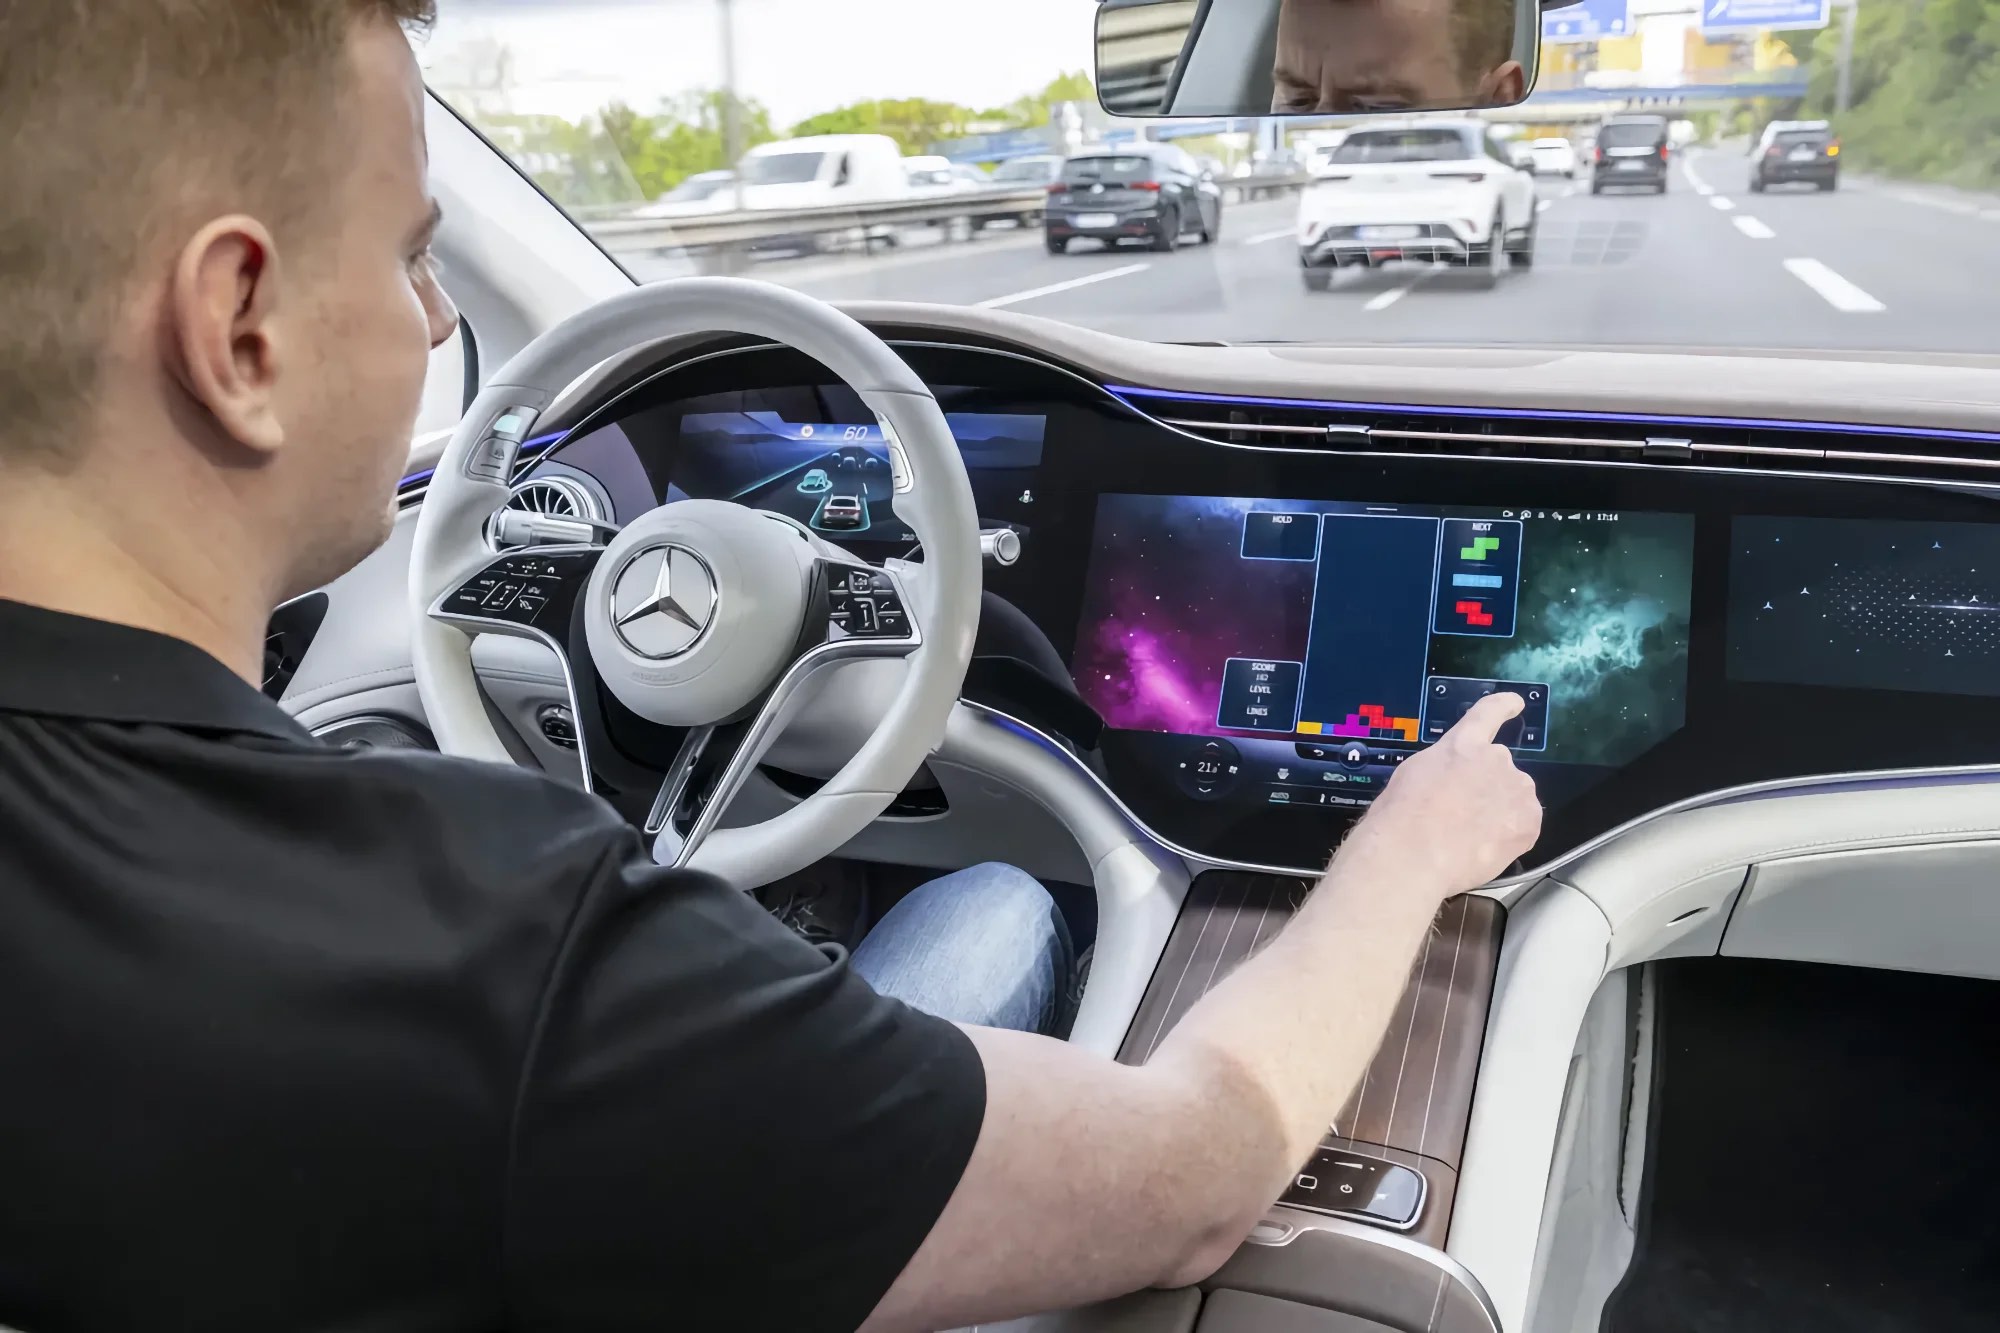 Mercedes-Benz is the first in the United States with Level 3 autonomous driving.  Play Tetris while sitting in the driver’s seat.